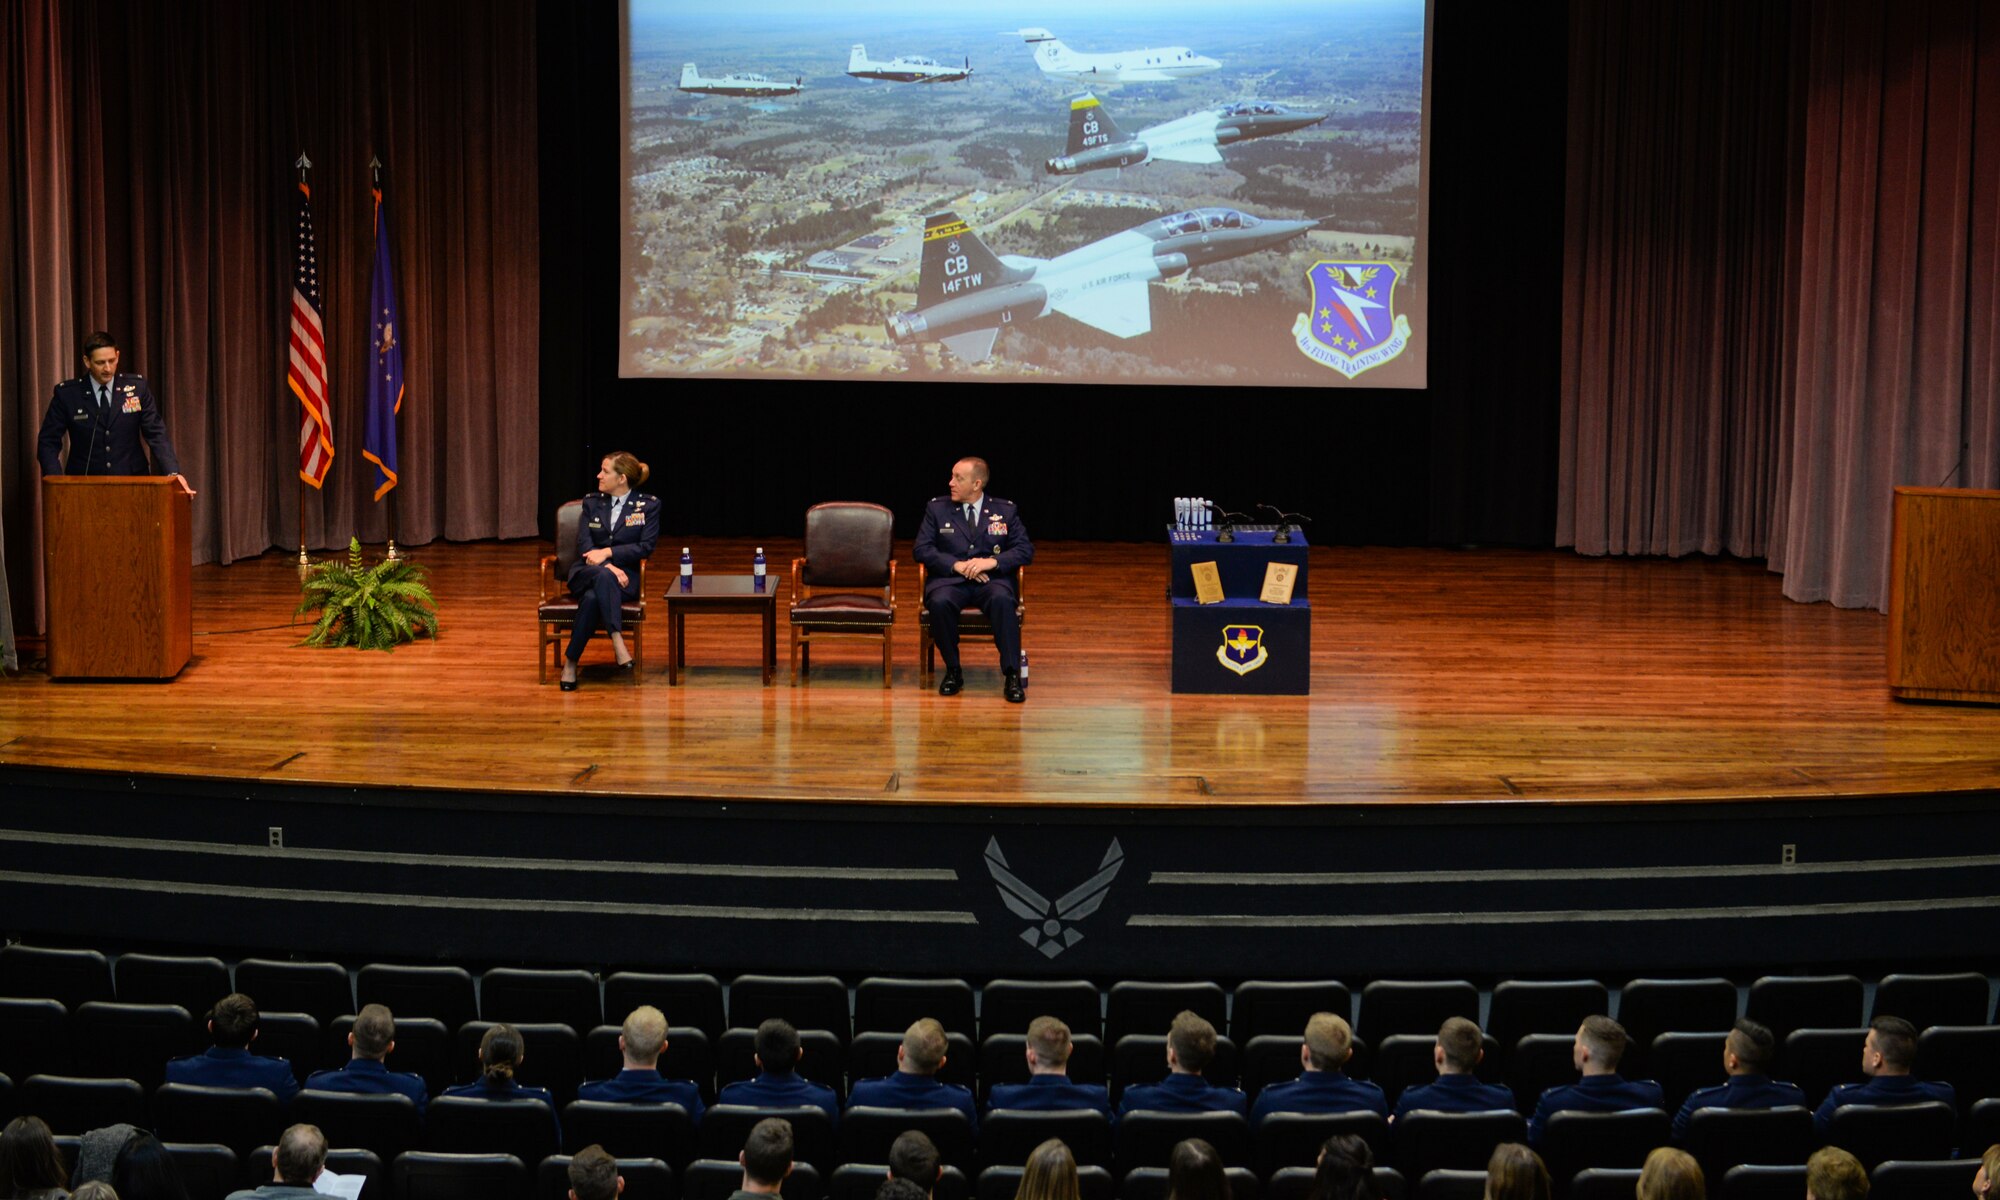 Col. Stephen Hodge, 314th Airlift Wing commander, delivers a speech at the graduation ceremony of Specialized Undergraduate Pilot Training Class 20-04/05, Dec. 13, 2019, at Columbus Air Force Base, Miss. During his speech, Hodge told the new pilots they set an example and that they will be looked up to, once they reach their assignments. (U.S. Air Force photo by Airman Davis Donaldson)